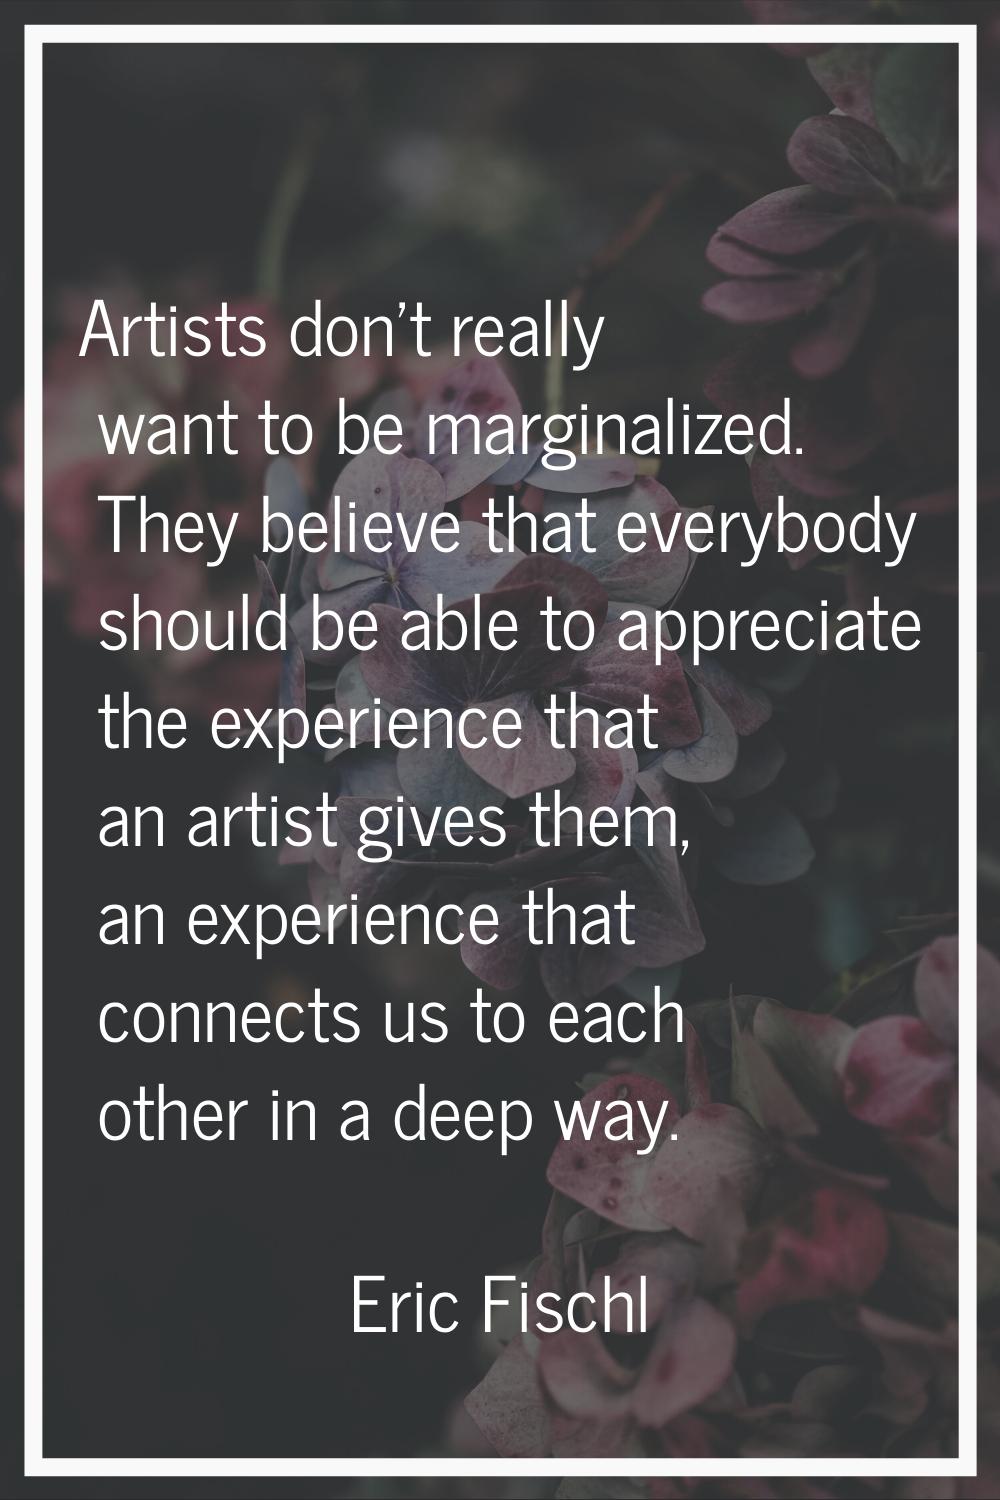 Artists don't really want to be marginalized. They believe that everybody should be able to appreci